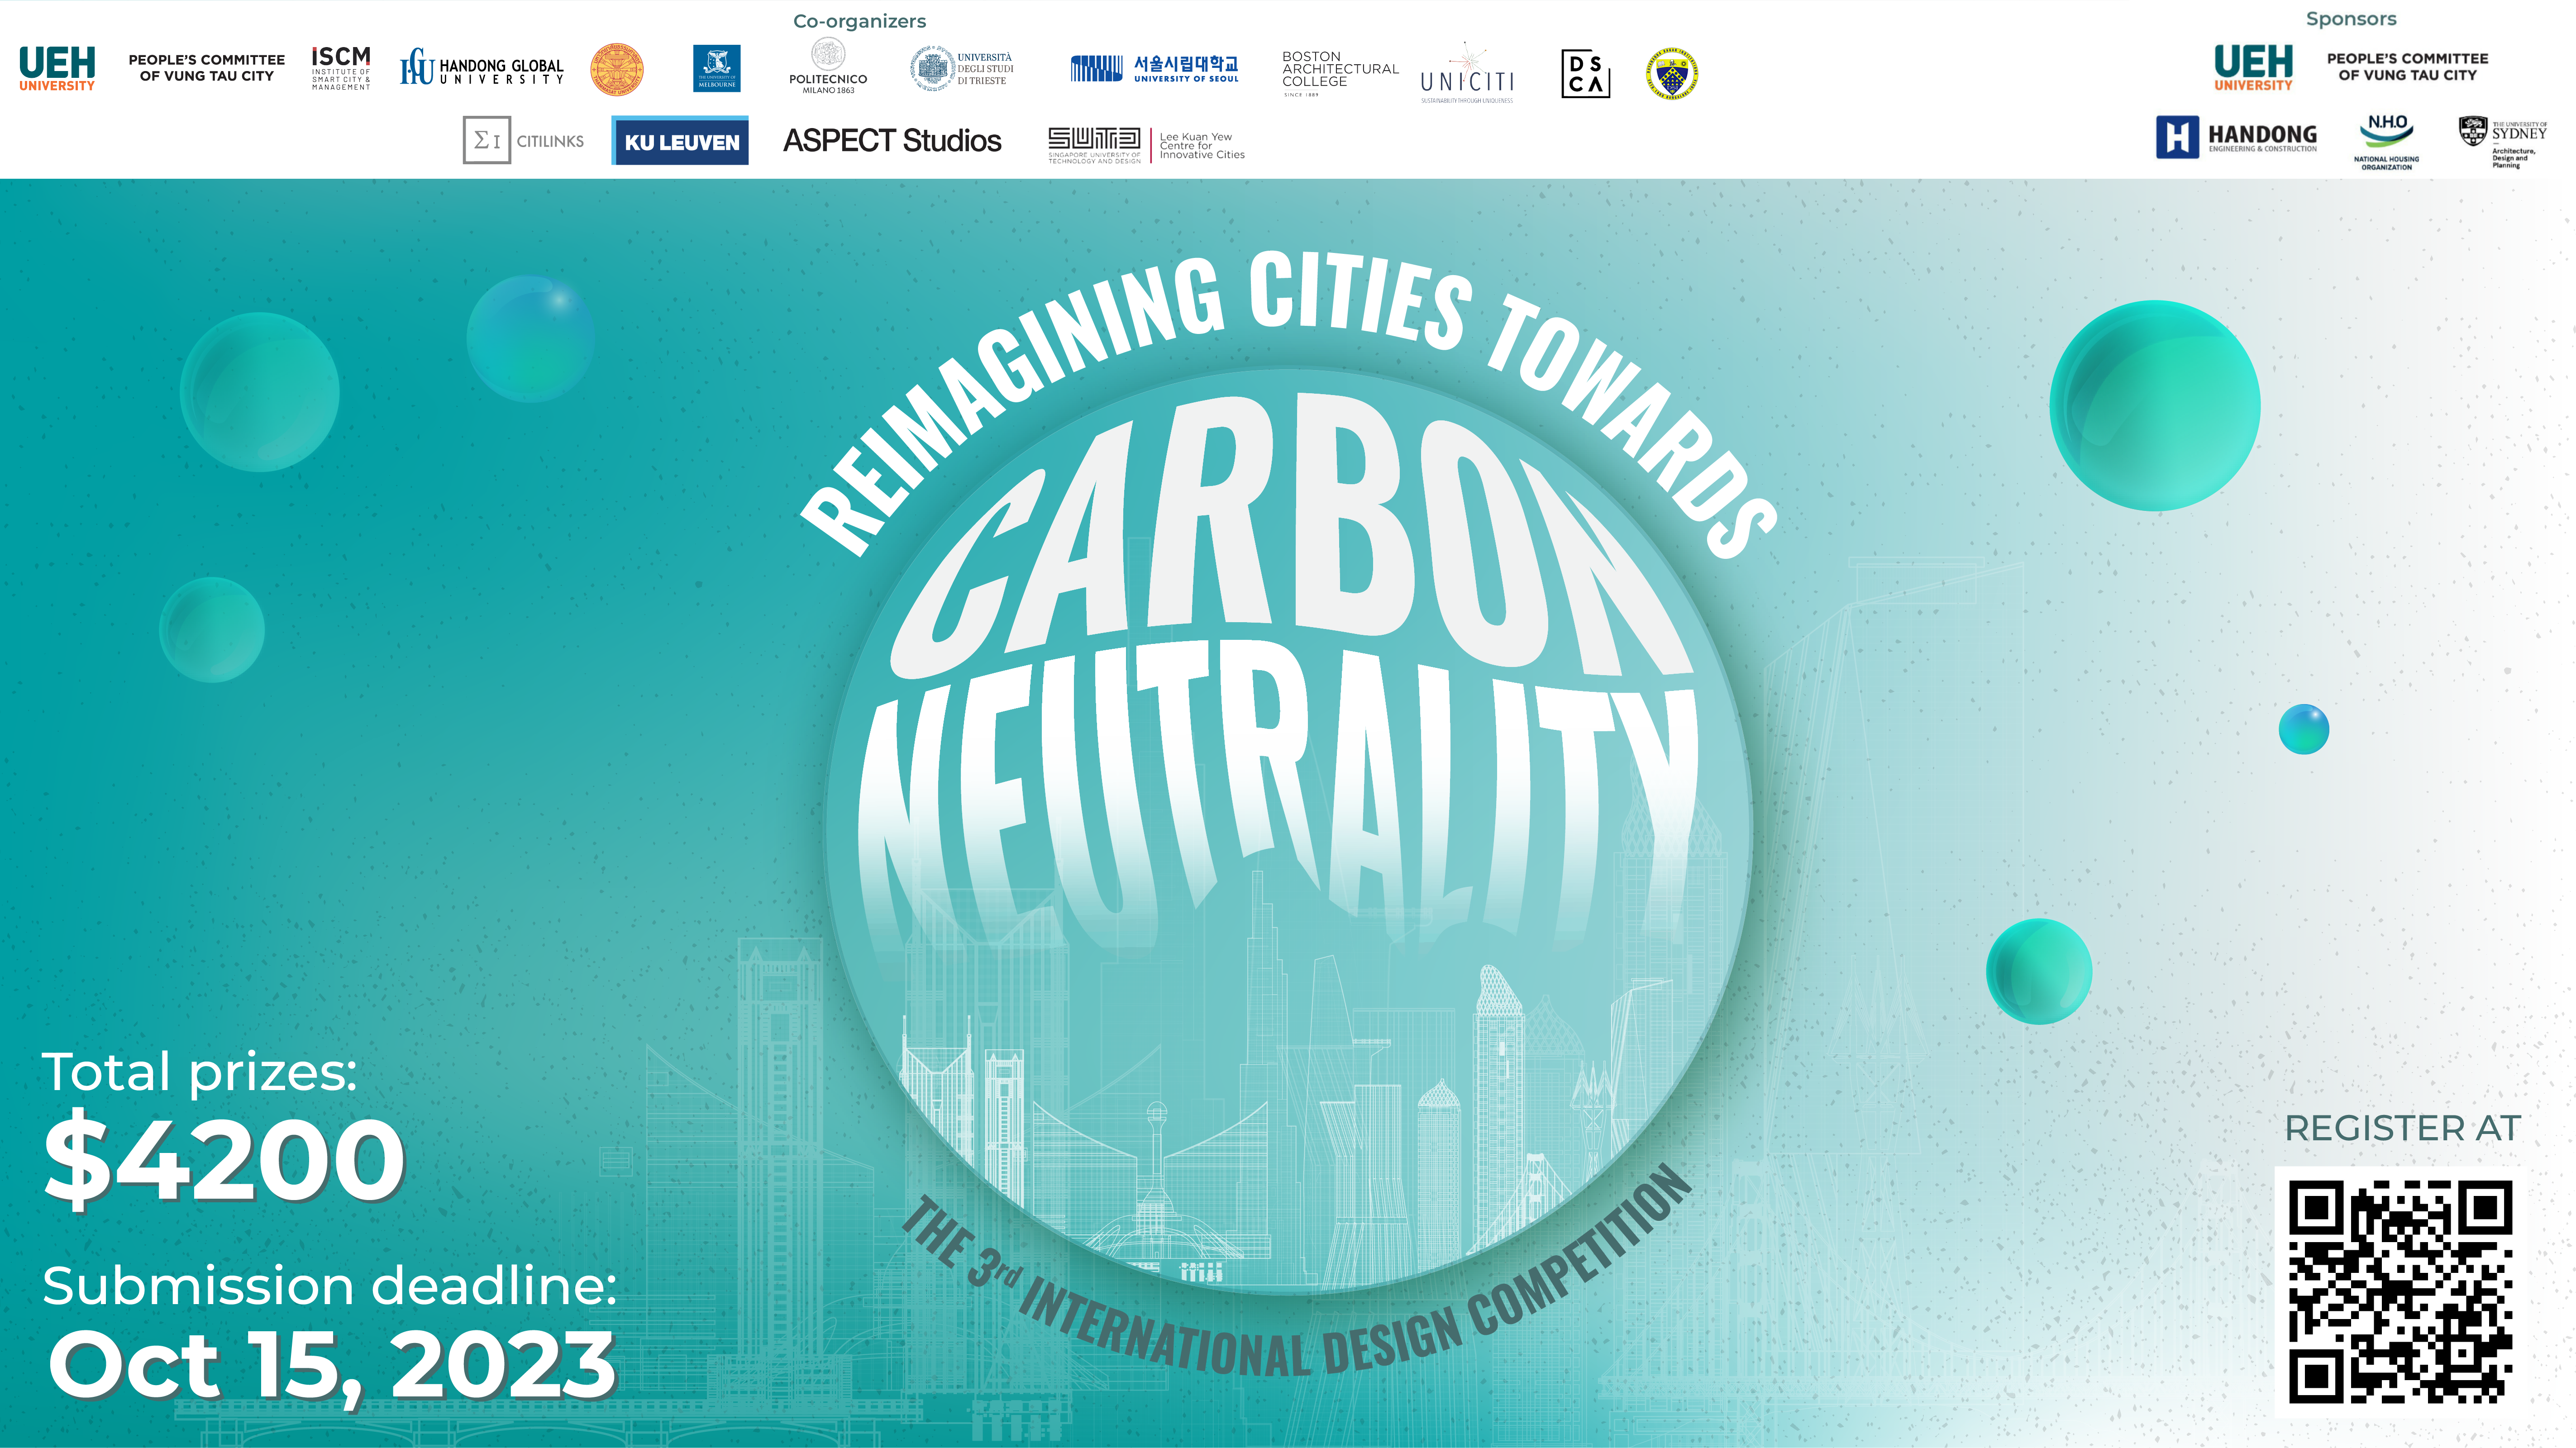 The 3rd International Design Competition: REIMAGING CITIES TOWARDS CARBON NEUTRALITY